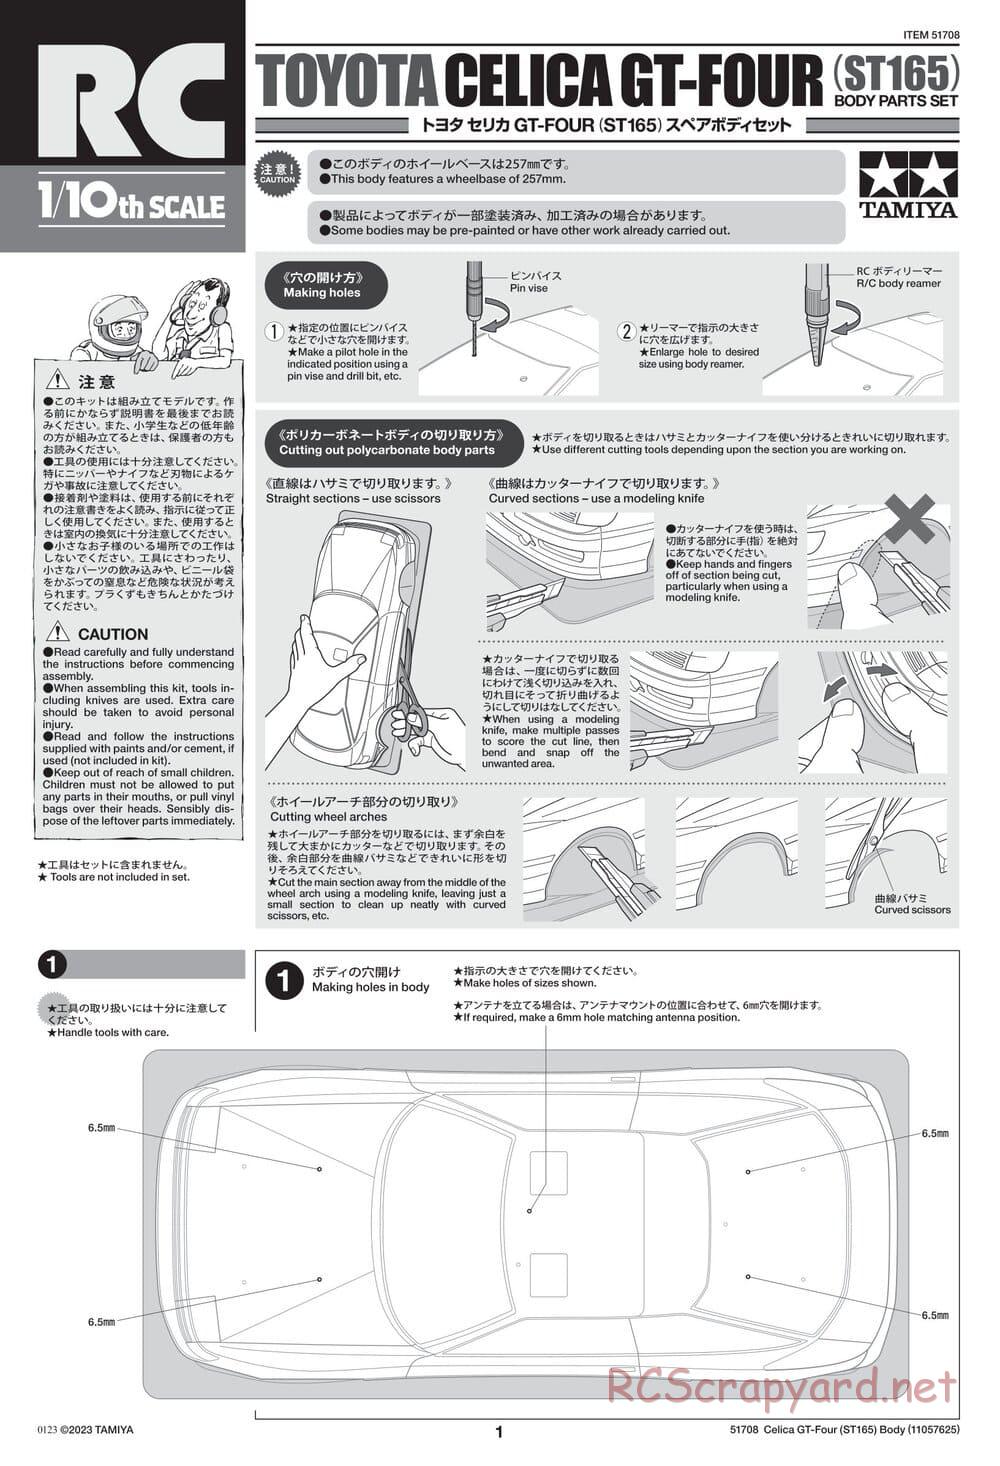 Tamiya - Toyota Celica GT-Four (ST165) - TT-02 Chassis - Body Manual - Page 1